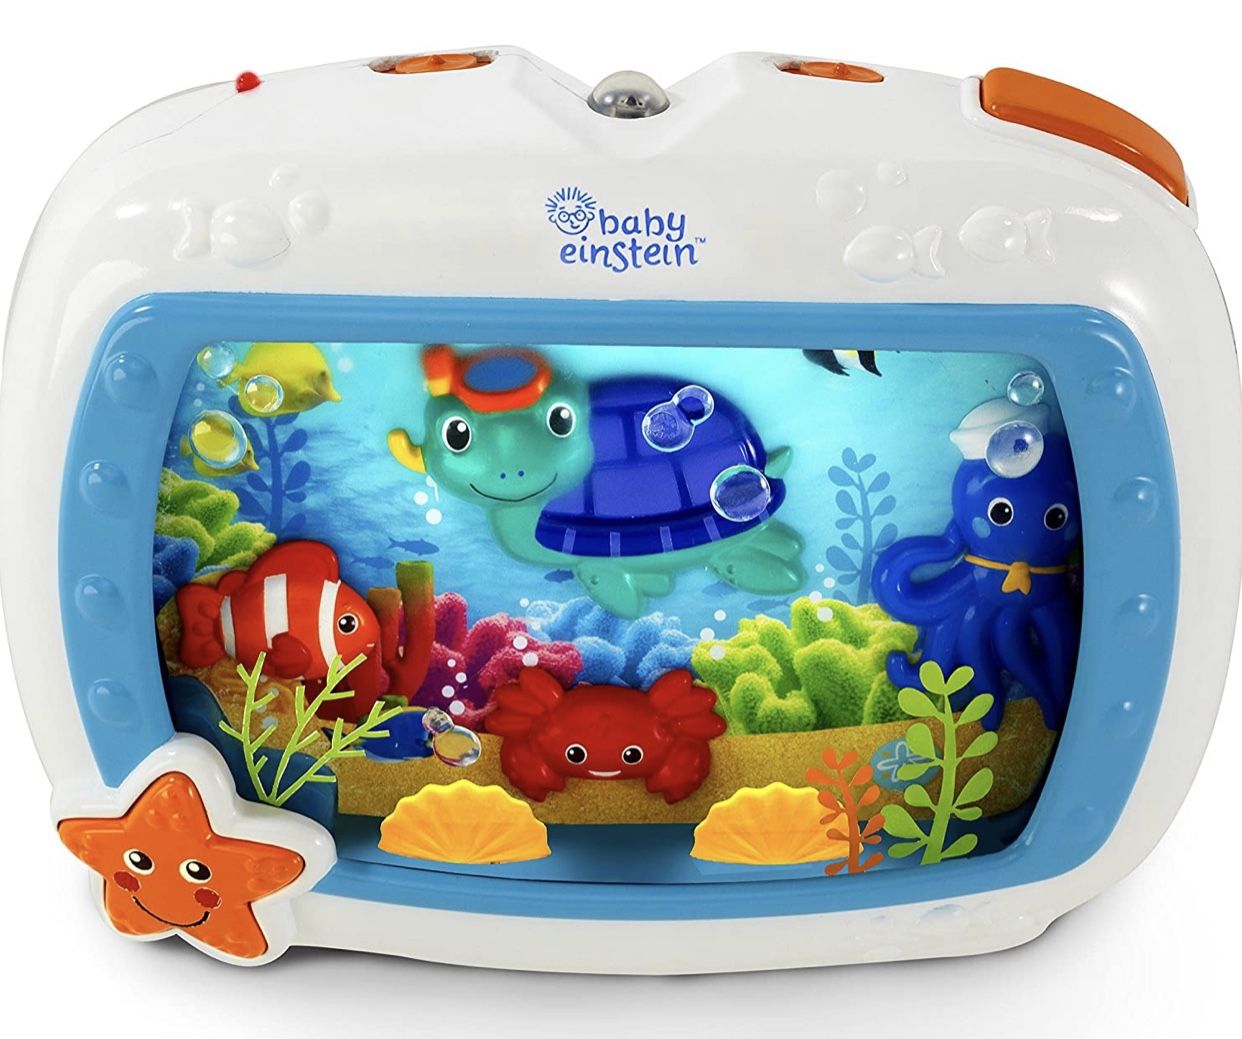 Baby Einstein Sea Dreams Soother in box.